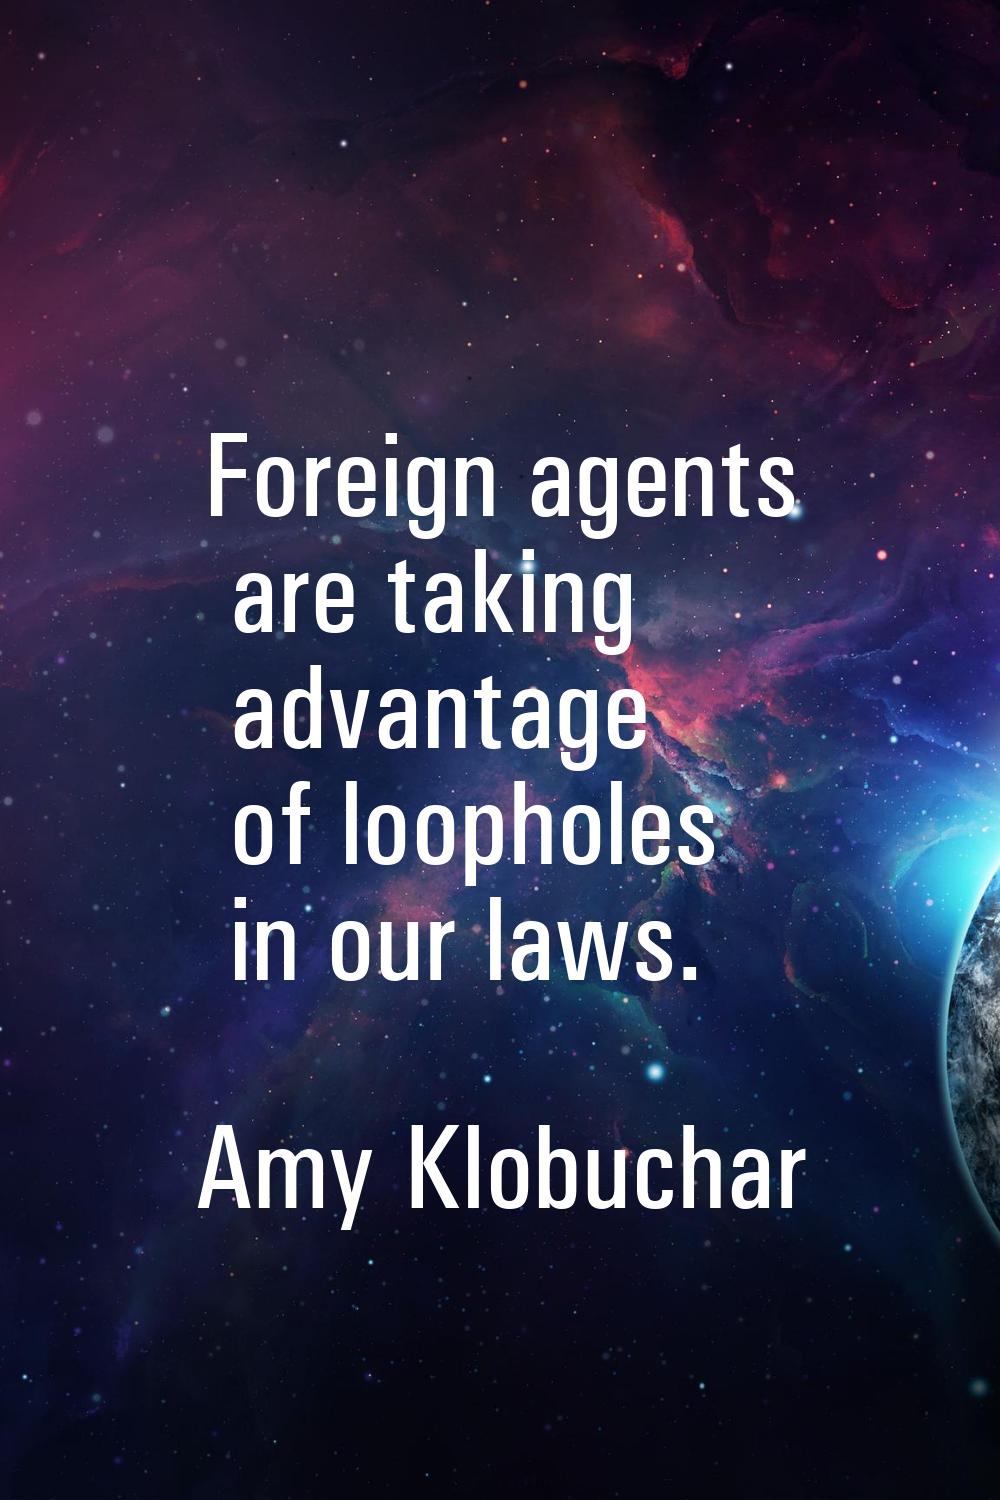 Foreign agents are taking advantage of loopholes in our laws.